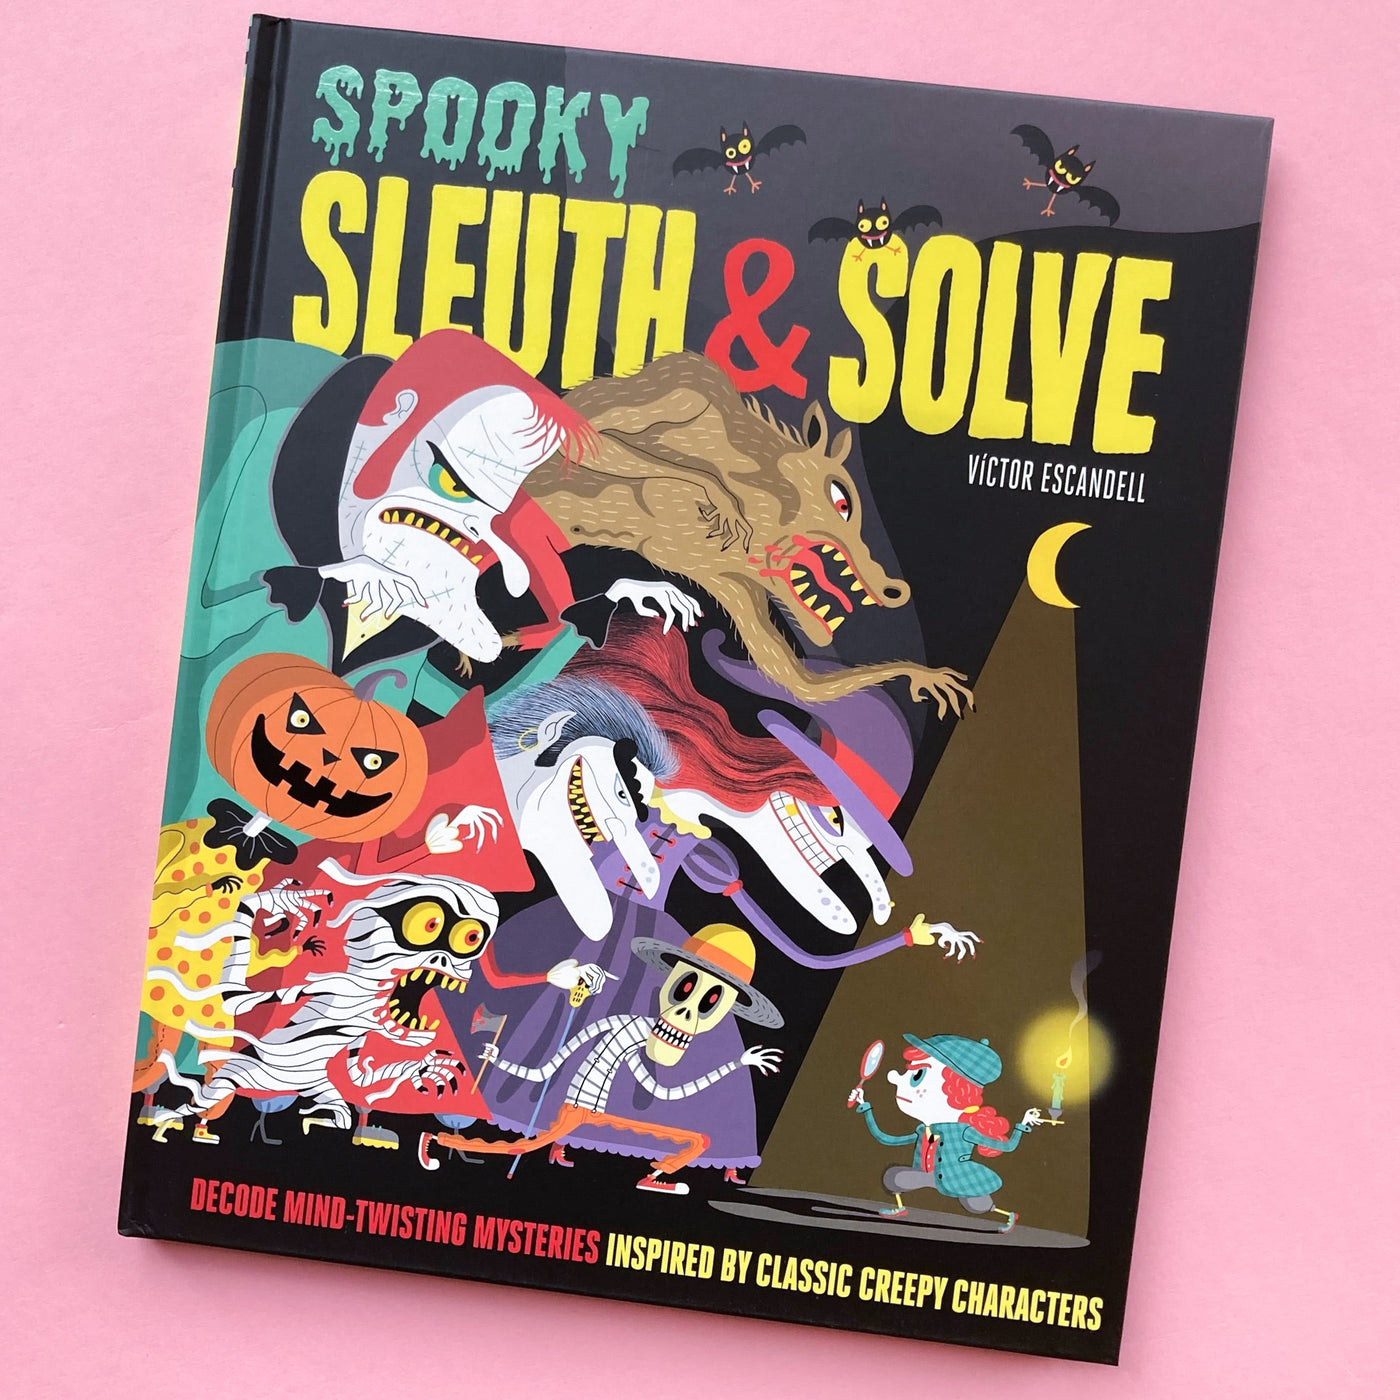 Sleuth & Solve: Spooky: Decode Mind-Twisting Mysteries Inspired by Classic Creepy Characters by Ana Gallo and Victor Escandell